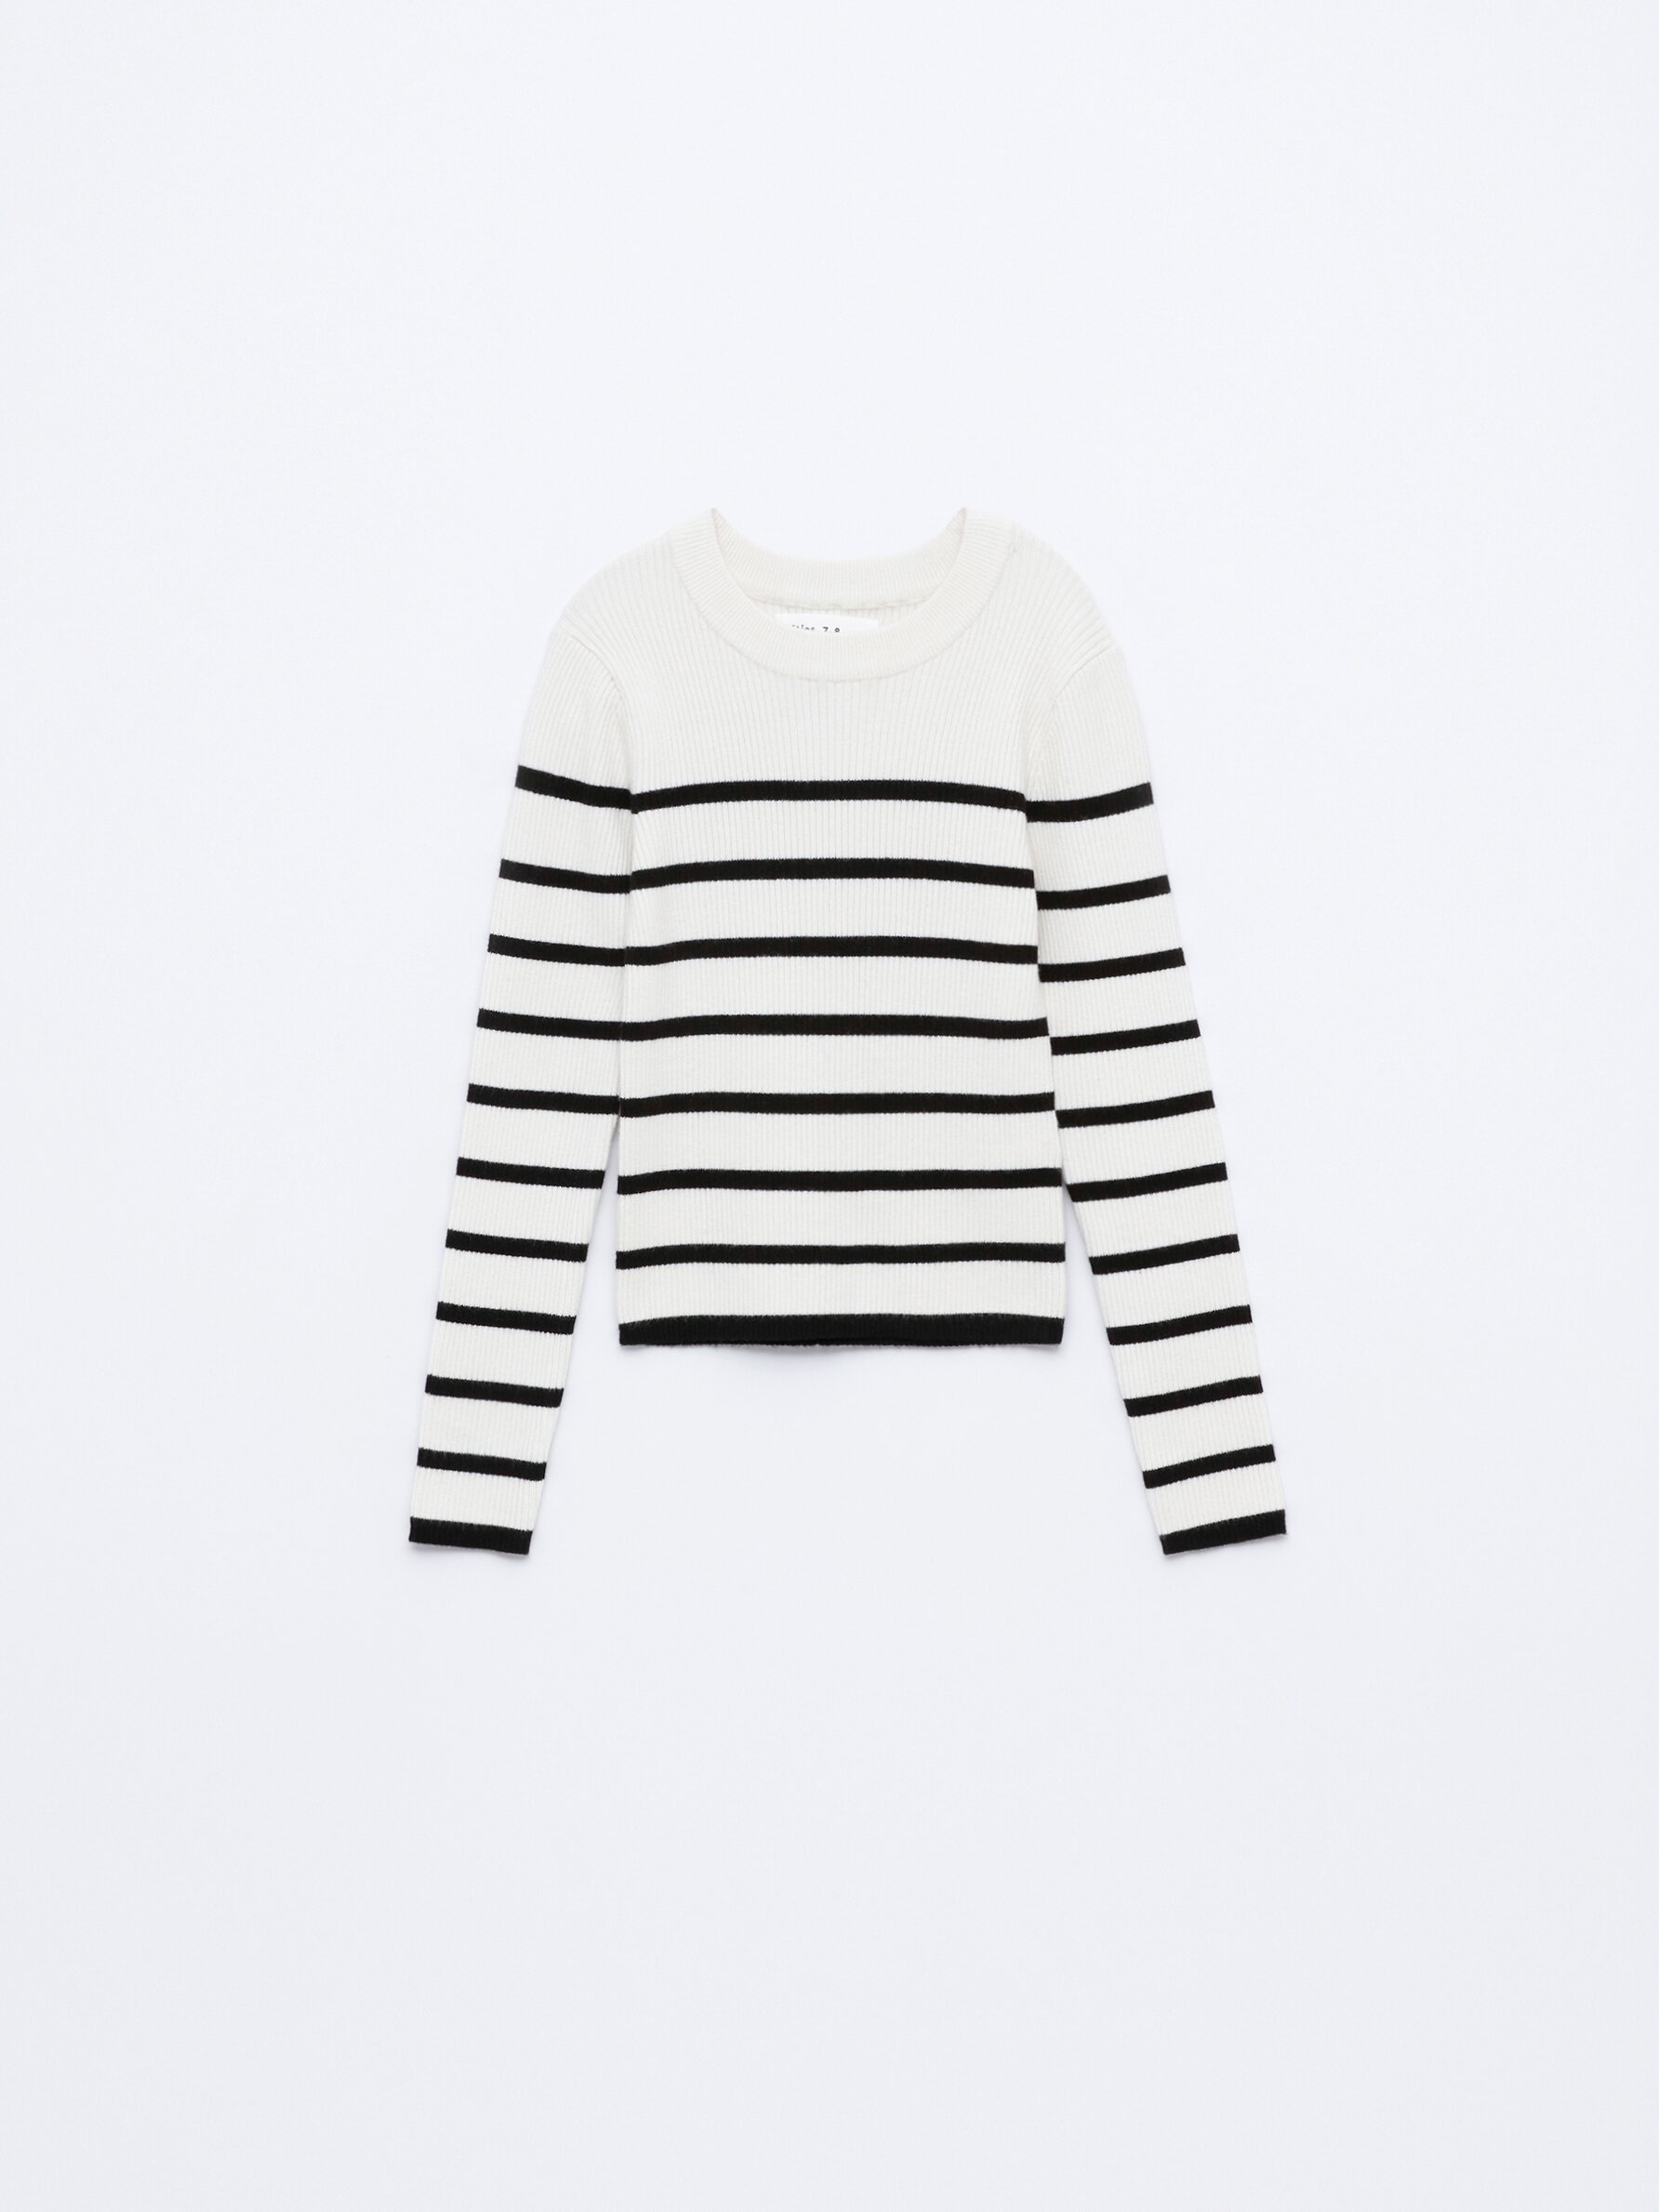 Ribbed knit sweater - Knitwear - CLOTHING - Girl - Kids 